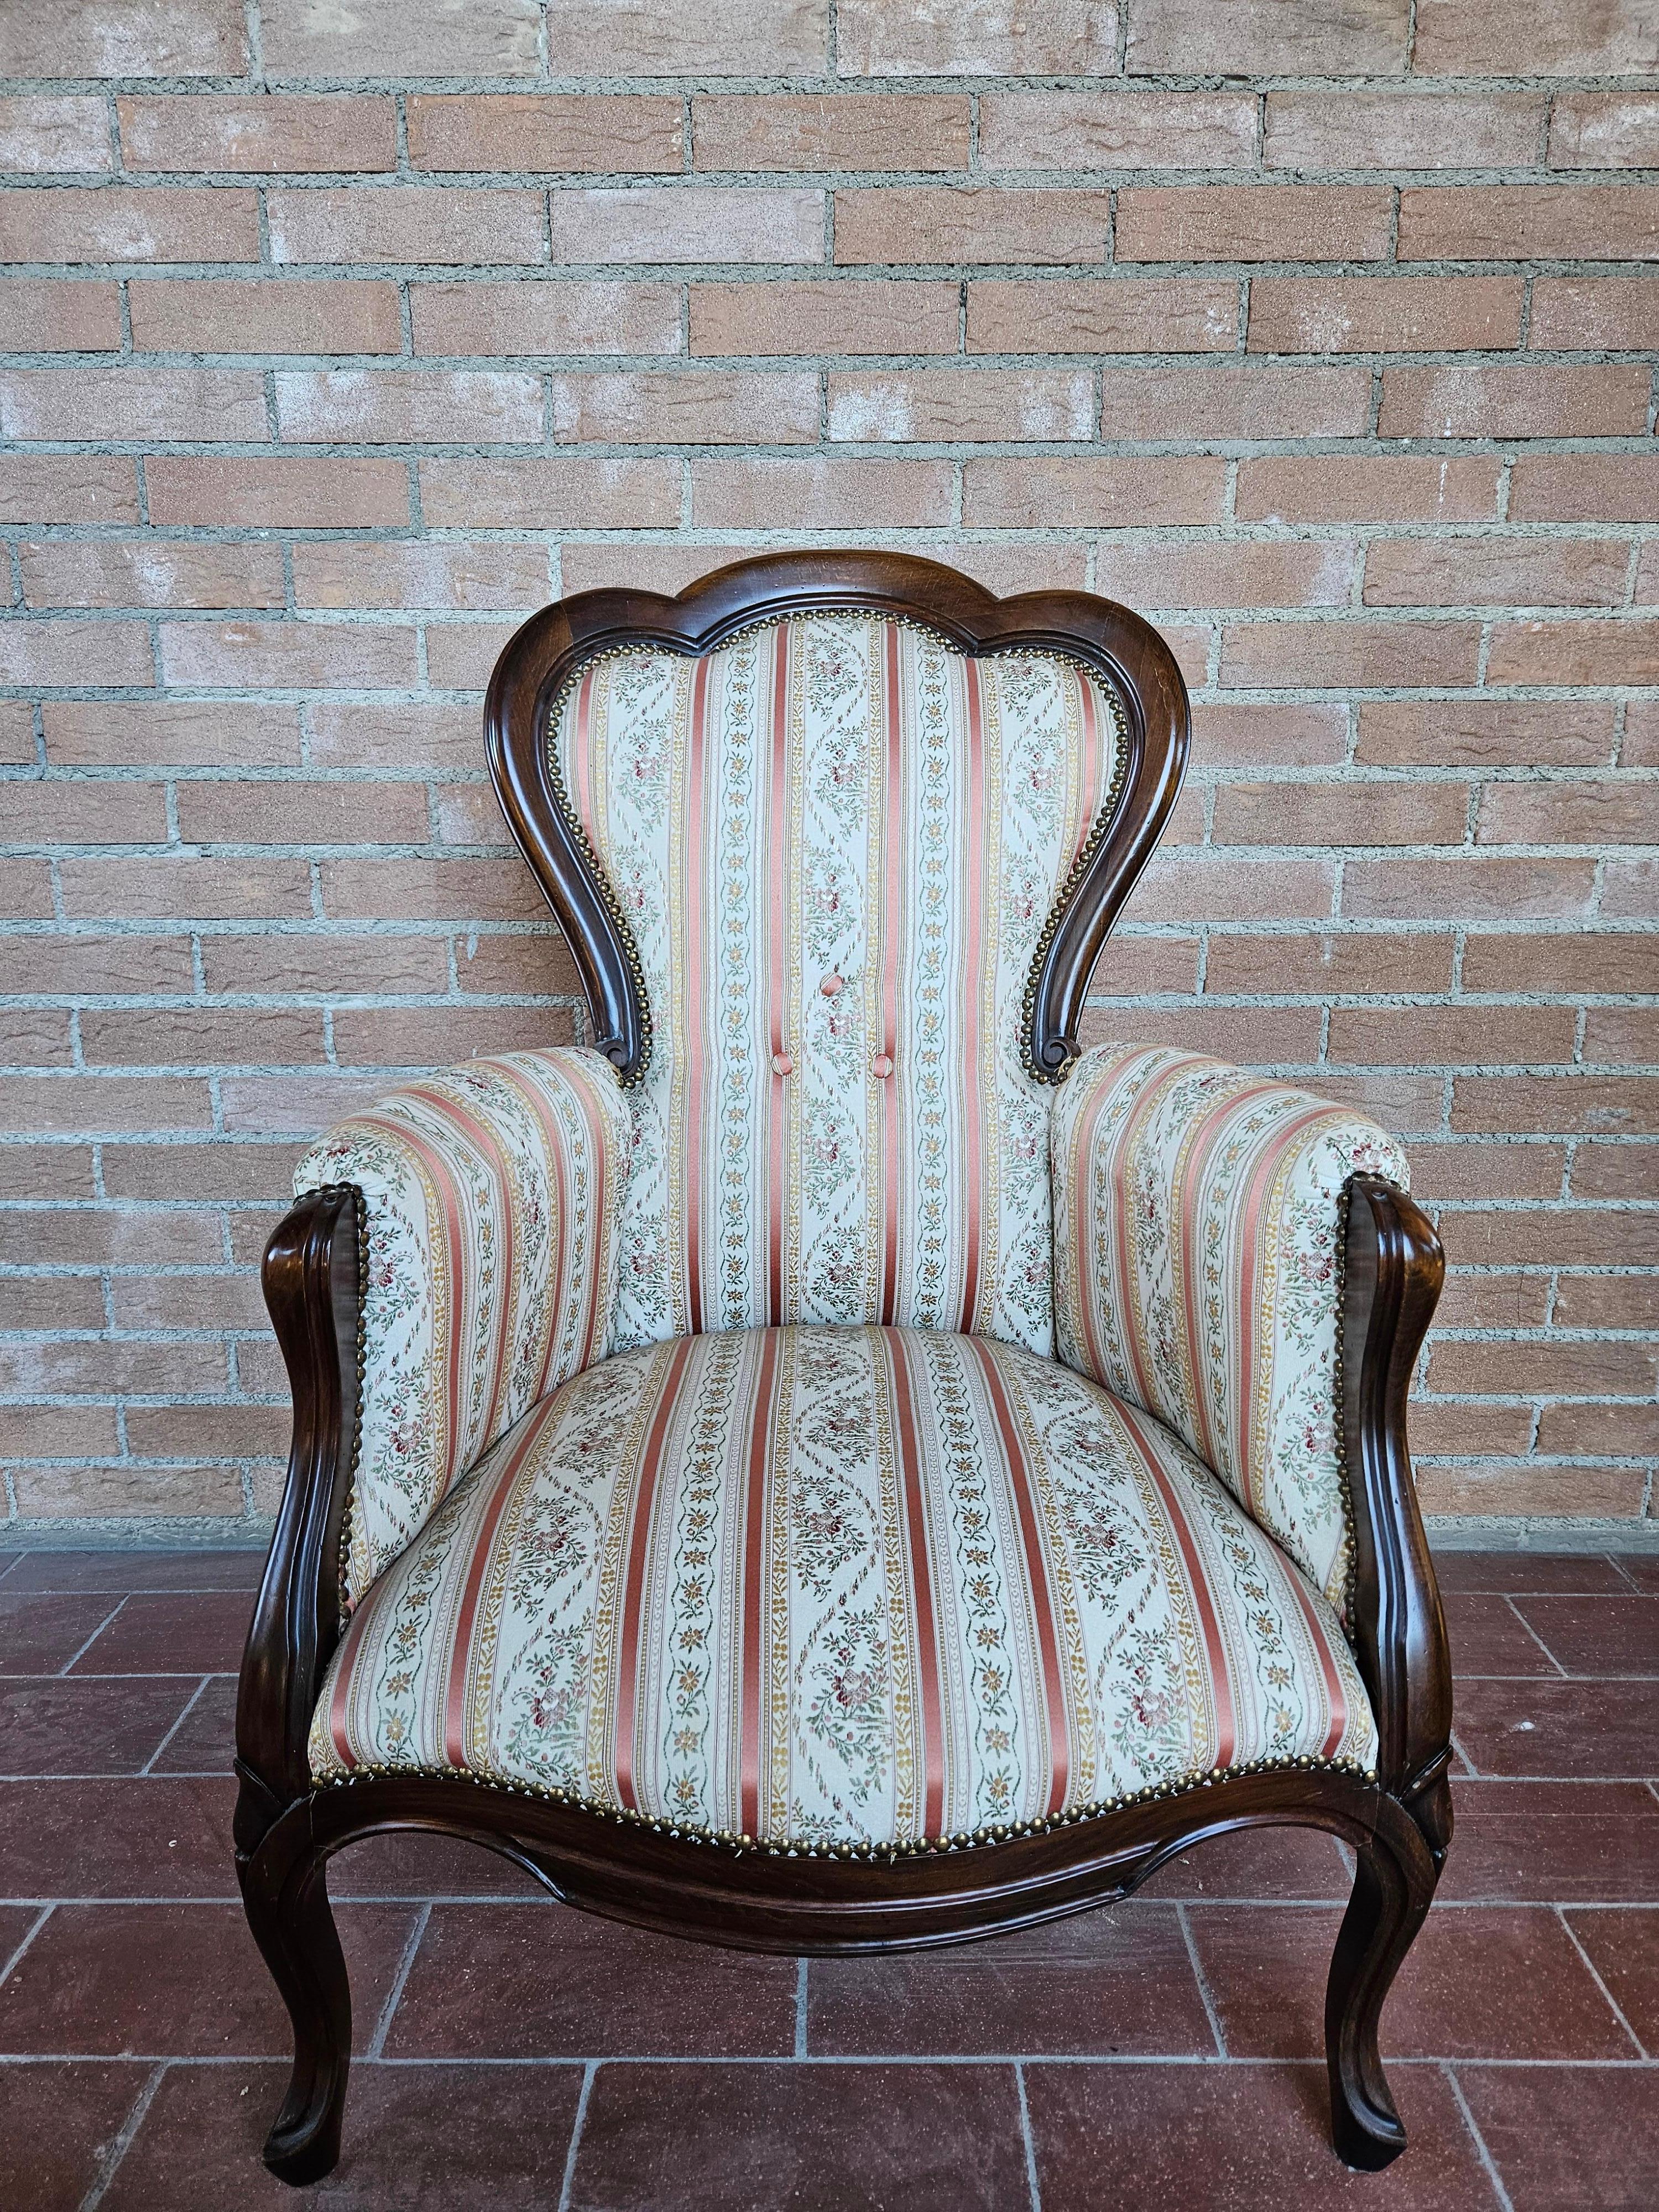 Louis Philippe style upholstered armchair with walnut frame and floral damask fabric.

Normal signs of wear due to age and use.
